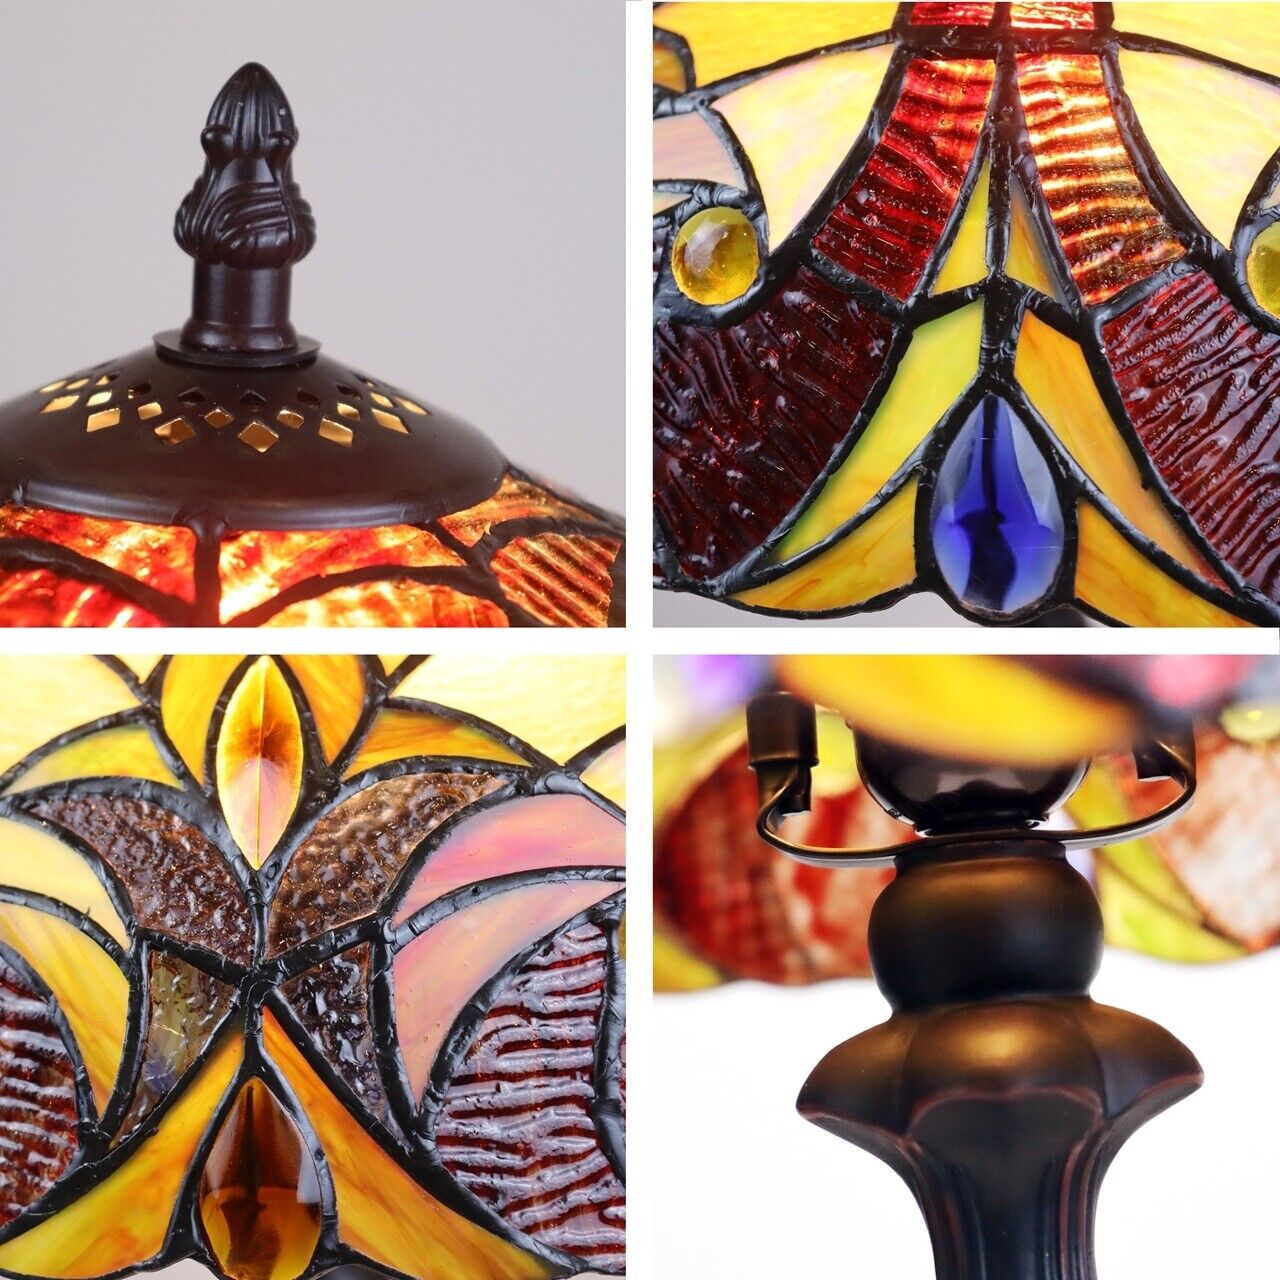 18.3" 1 light Stained Glass Table Lamp